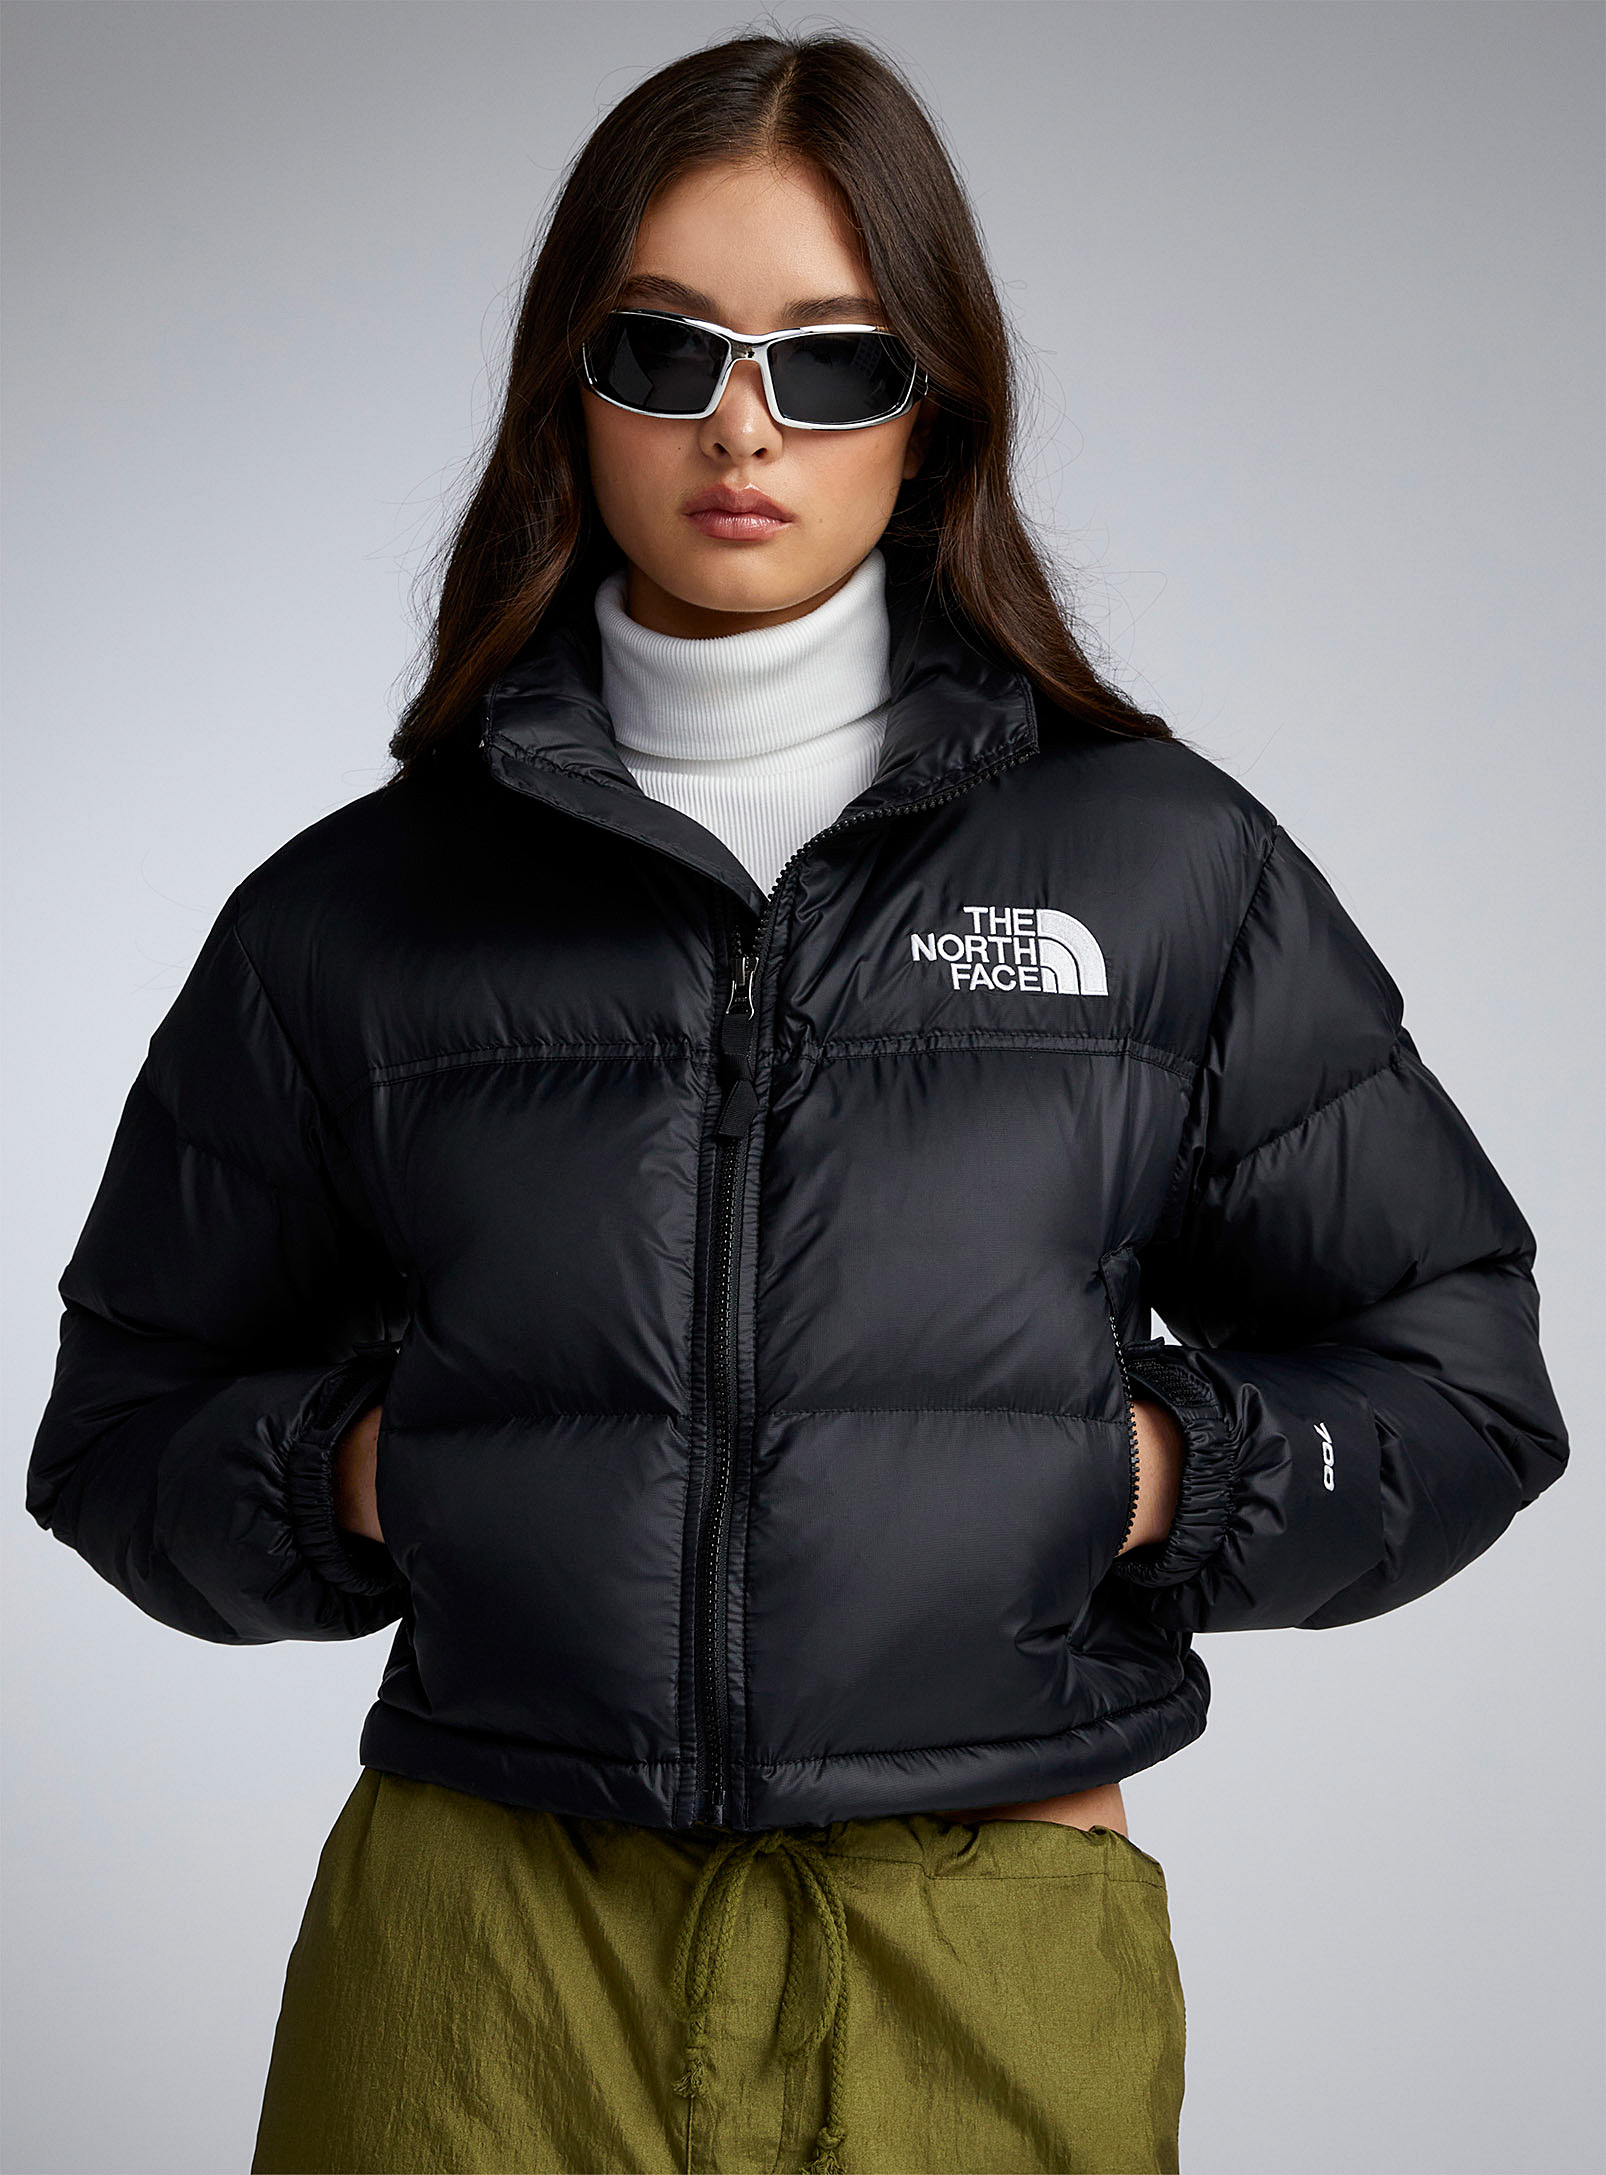 The North Face - Women's Nuptse cropped quilted jacket